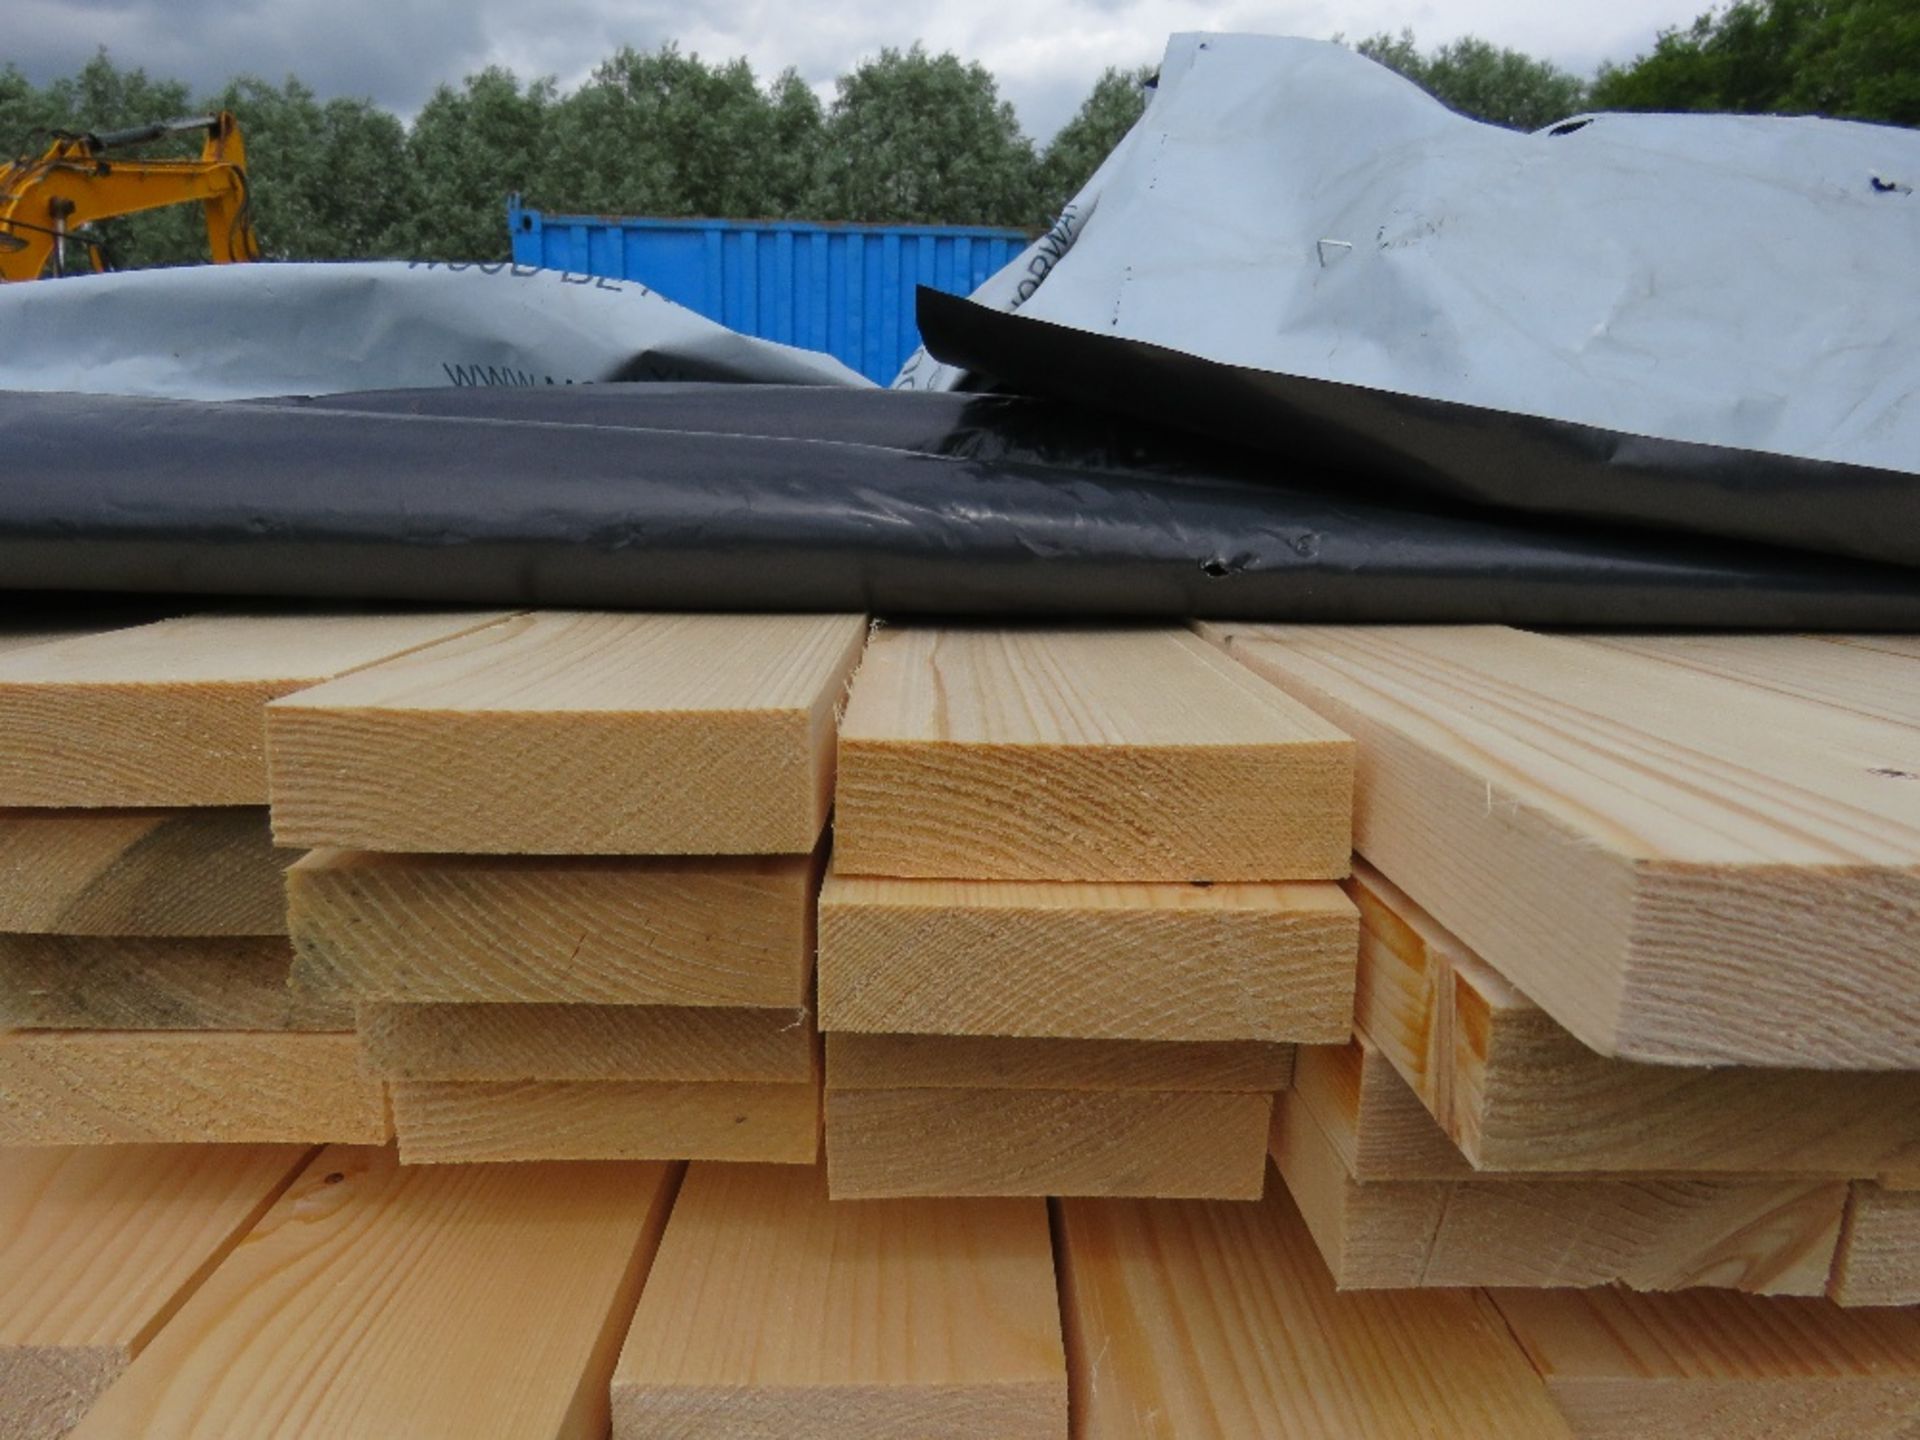 EXTRA LARGE PACK OF TIMBER FENCING SLATS: 70MM X 20MM APPROX @ 1.8METRES LENGTH APPROX. - Image 3 of 3